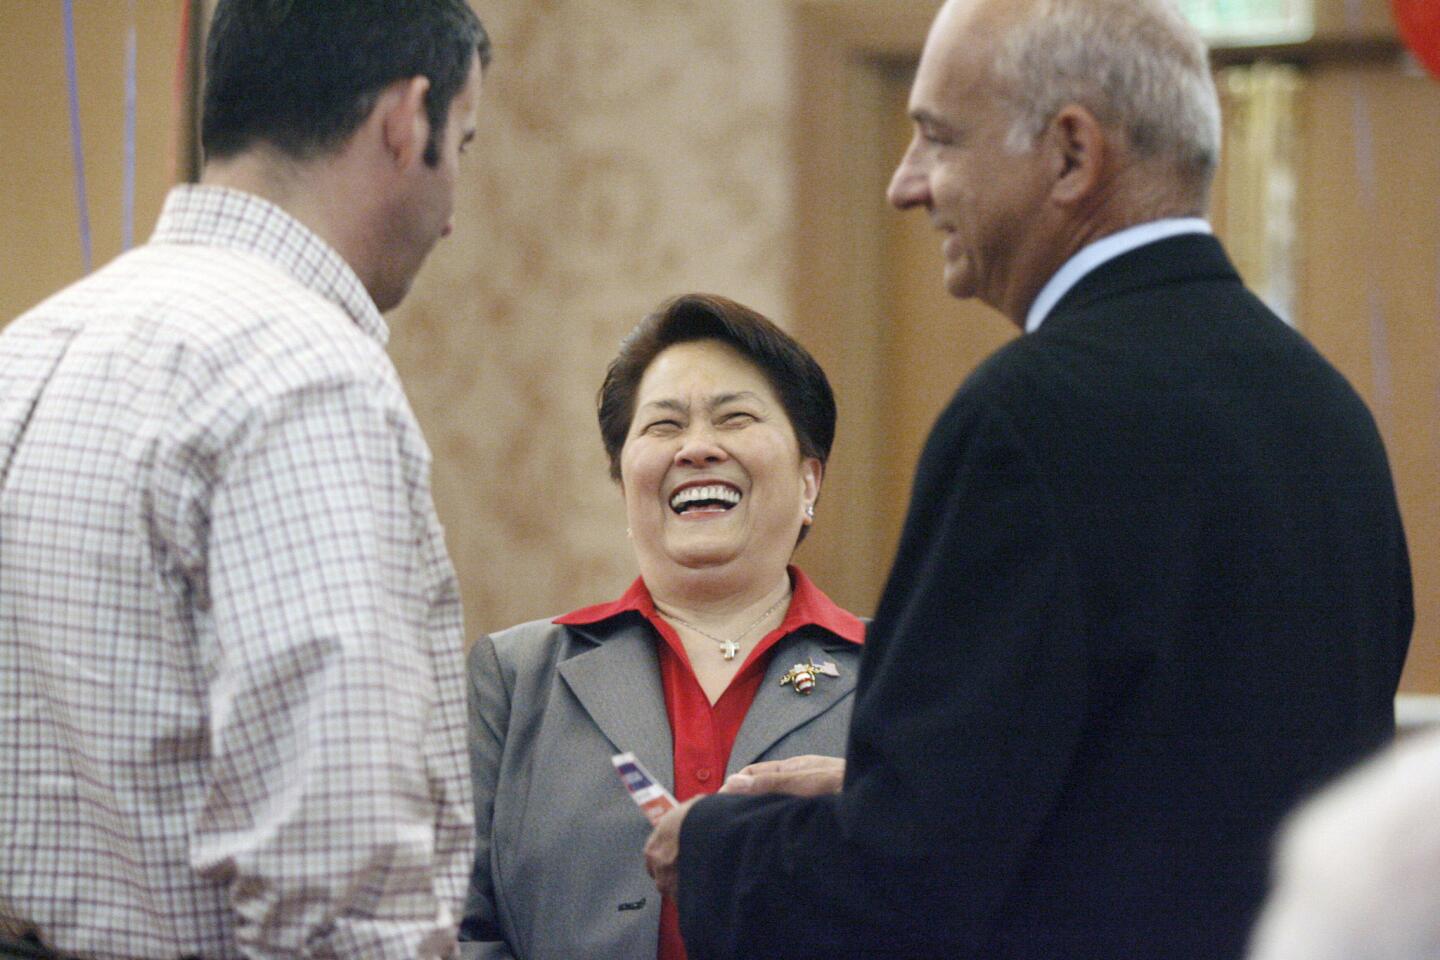 Former Glendale zoning administrator Edith Fuentes, center, is greeted by Tony Tartaglia, left, and former mayor of Glendale Bob Yousefian during her campaign kickoff for city council at Hilton in Glendale on Thursday, September 20, 2012.